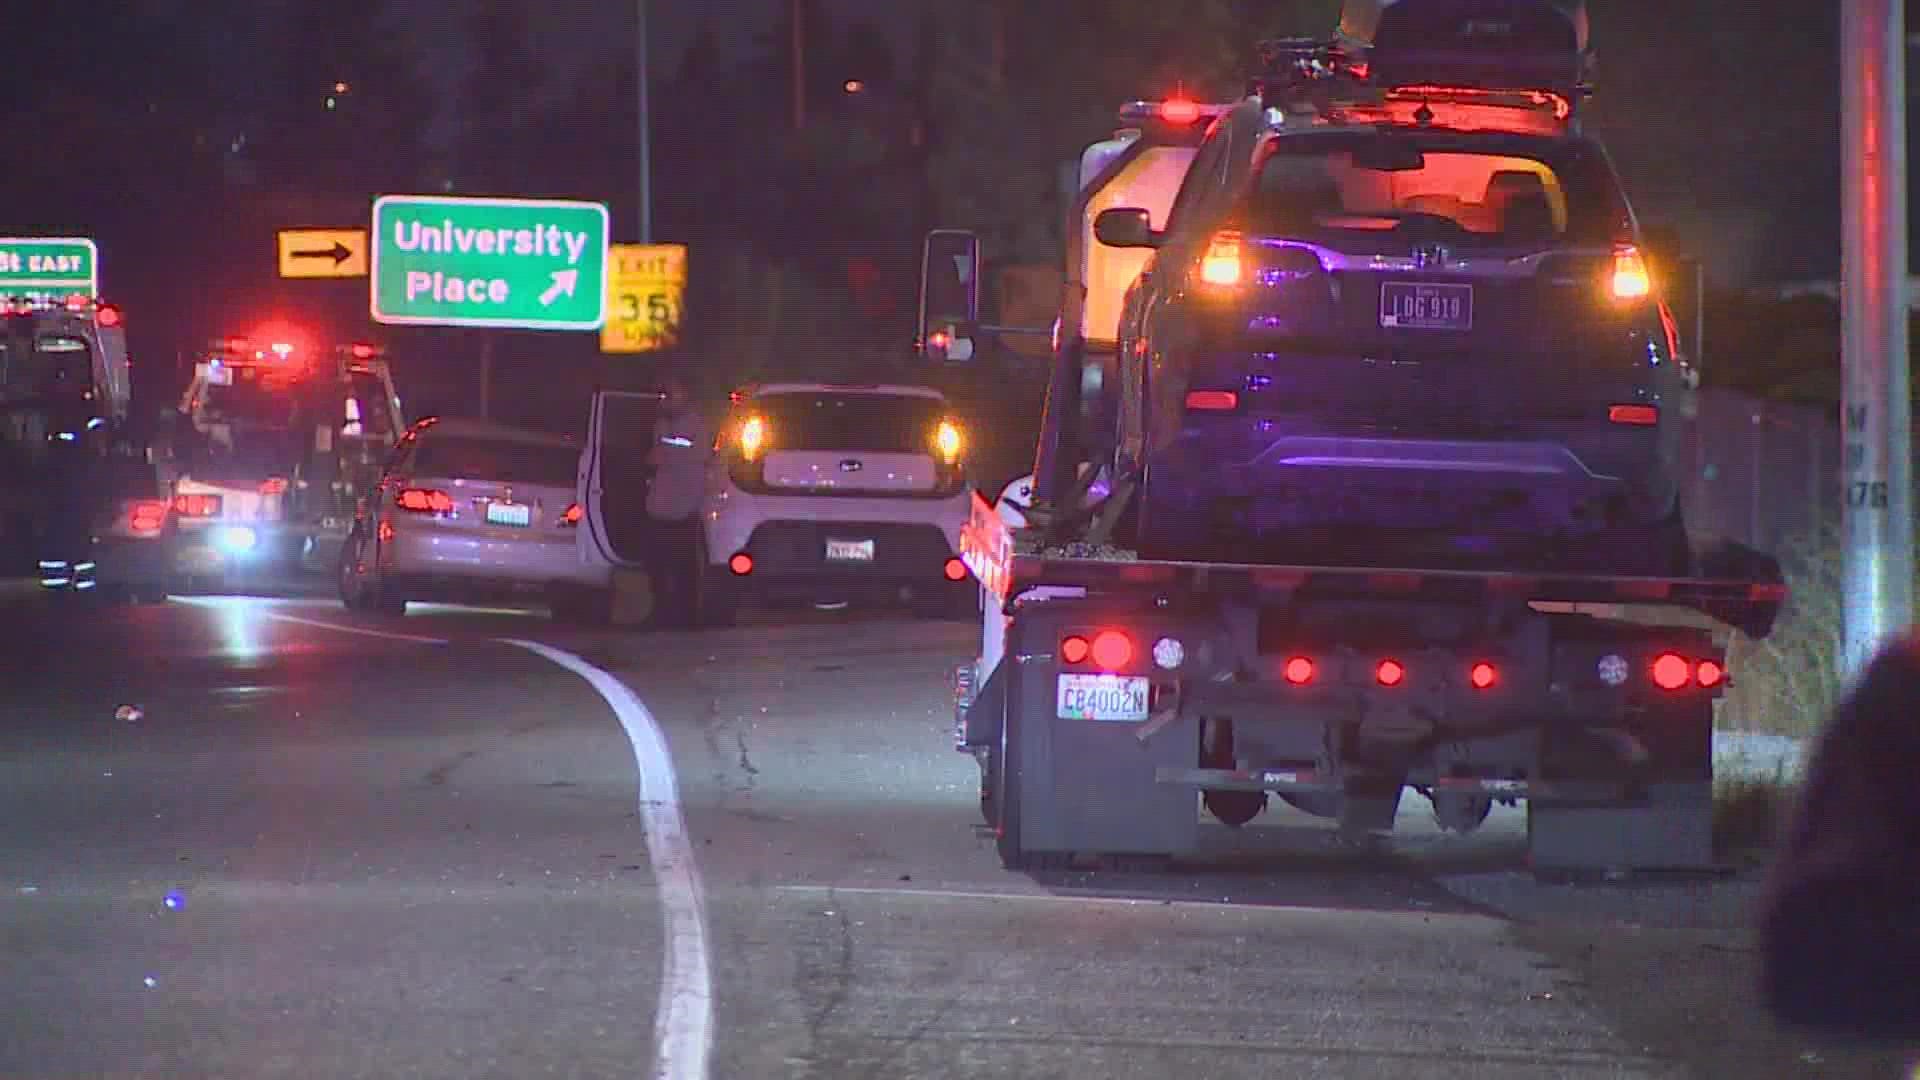 Two WSDOT vehicles and a state trooper vehicle were involved in a series of crashes on southbound I-5 in Tacoma early Friday morning.